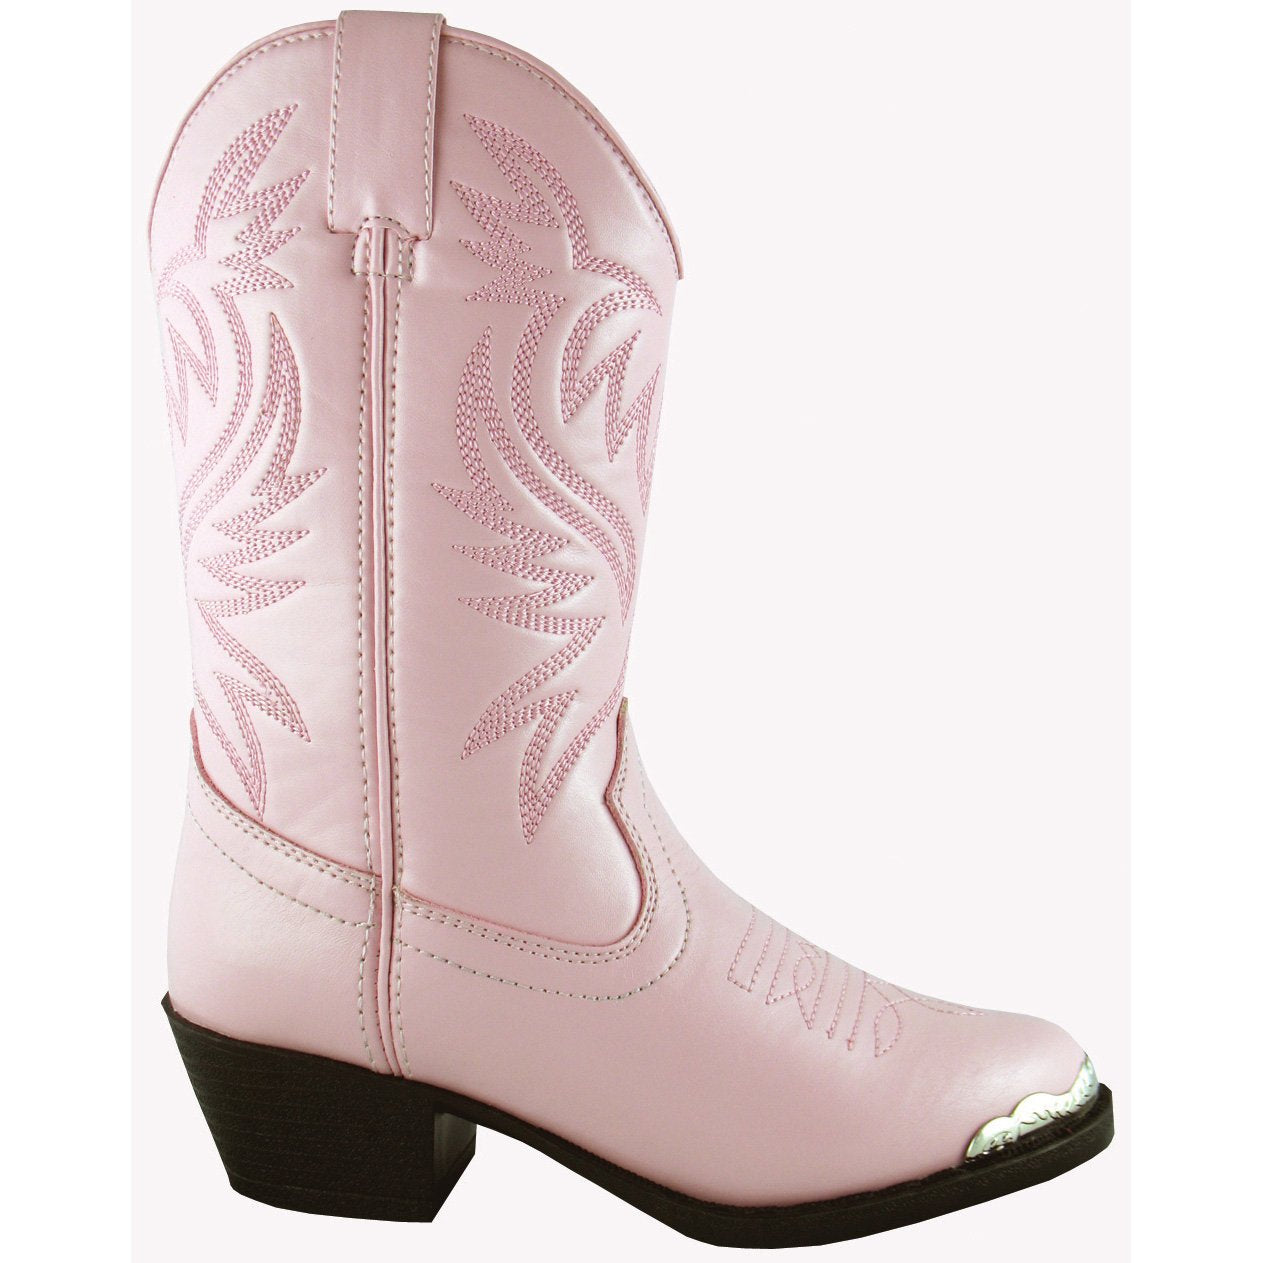 Smoky Mountain Girl's Youth Lt. Pink Western Boot